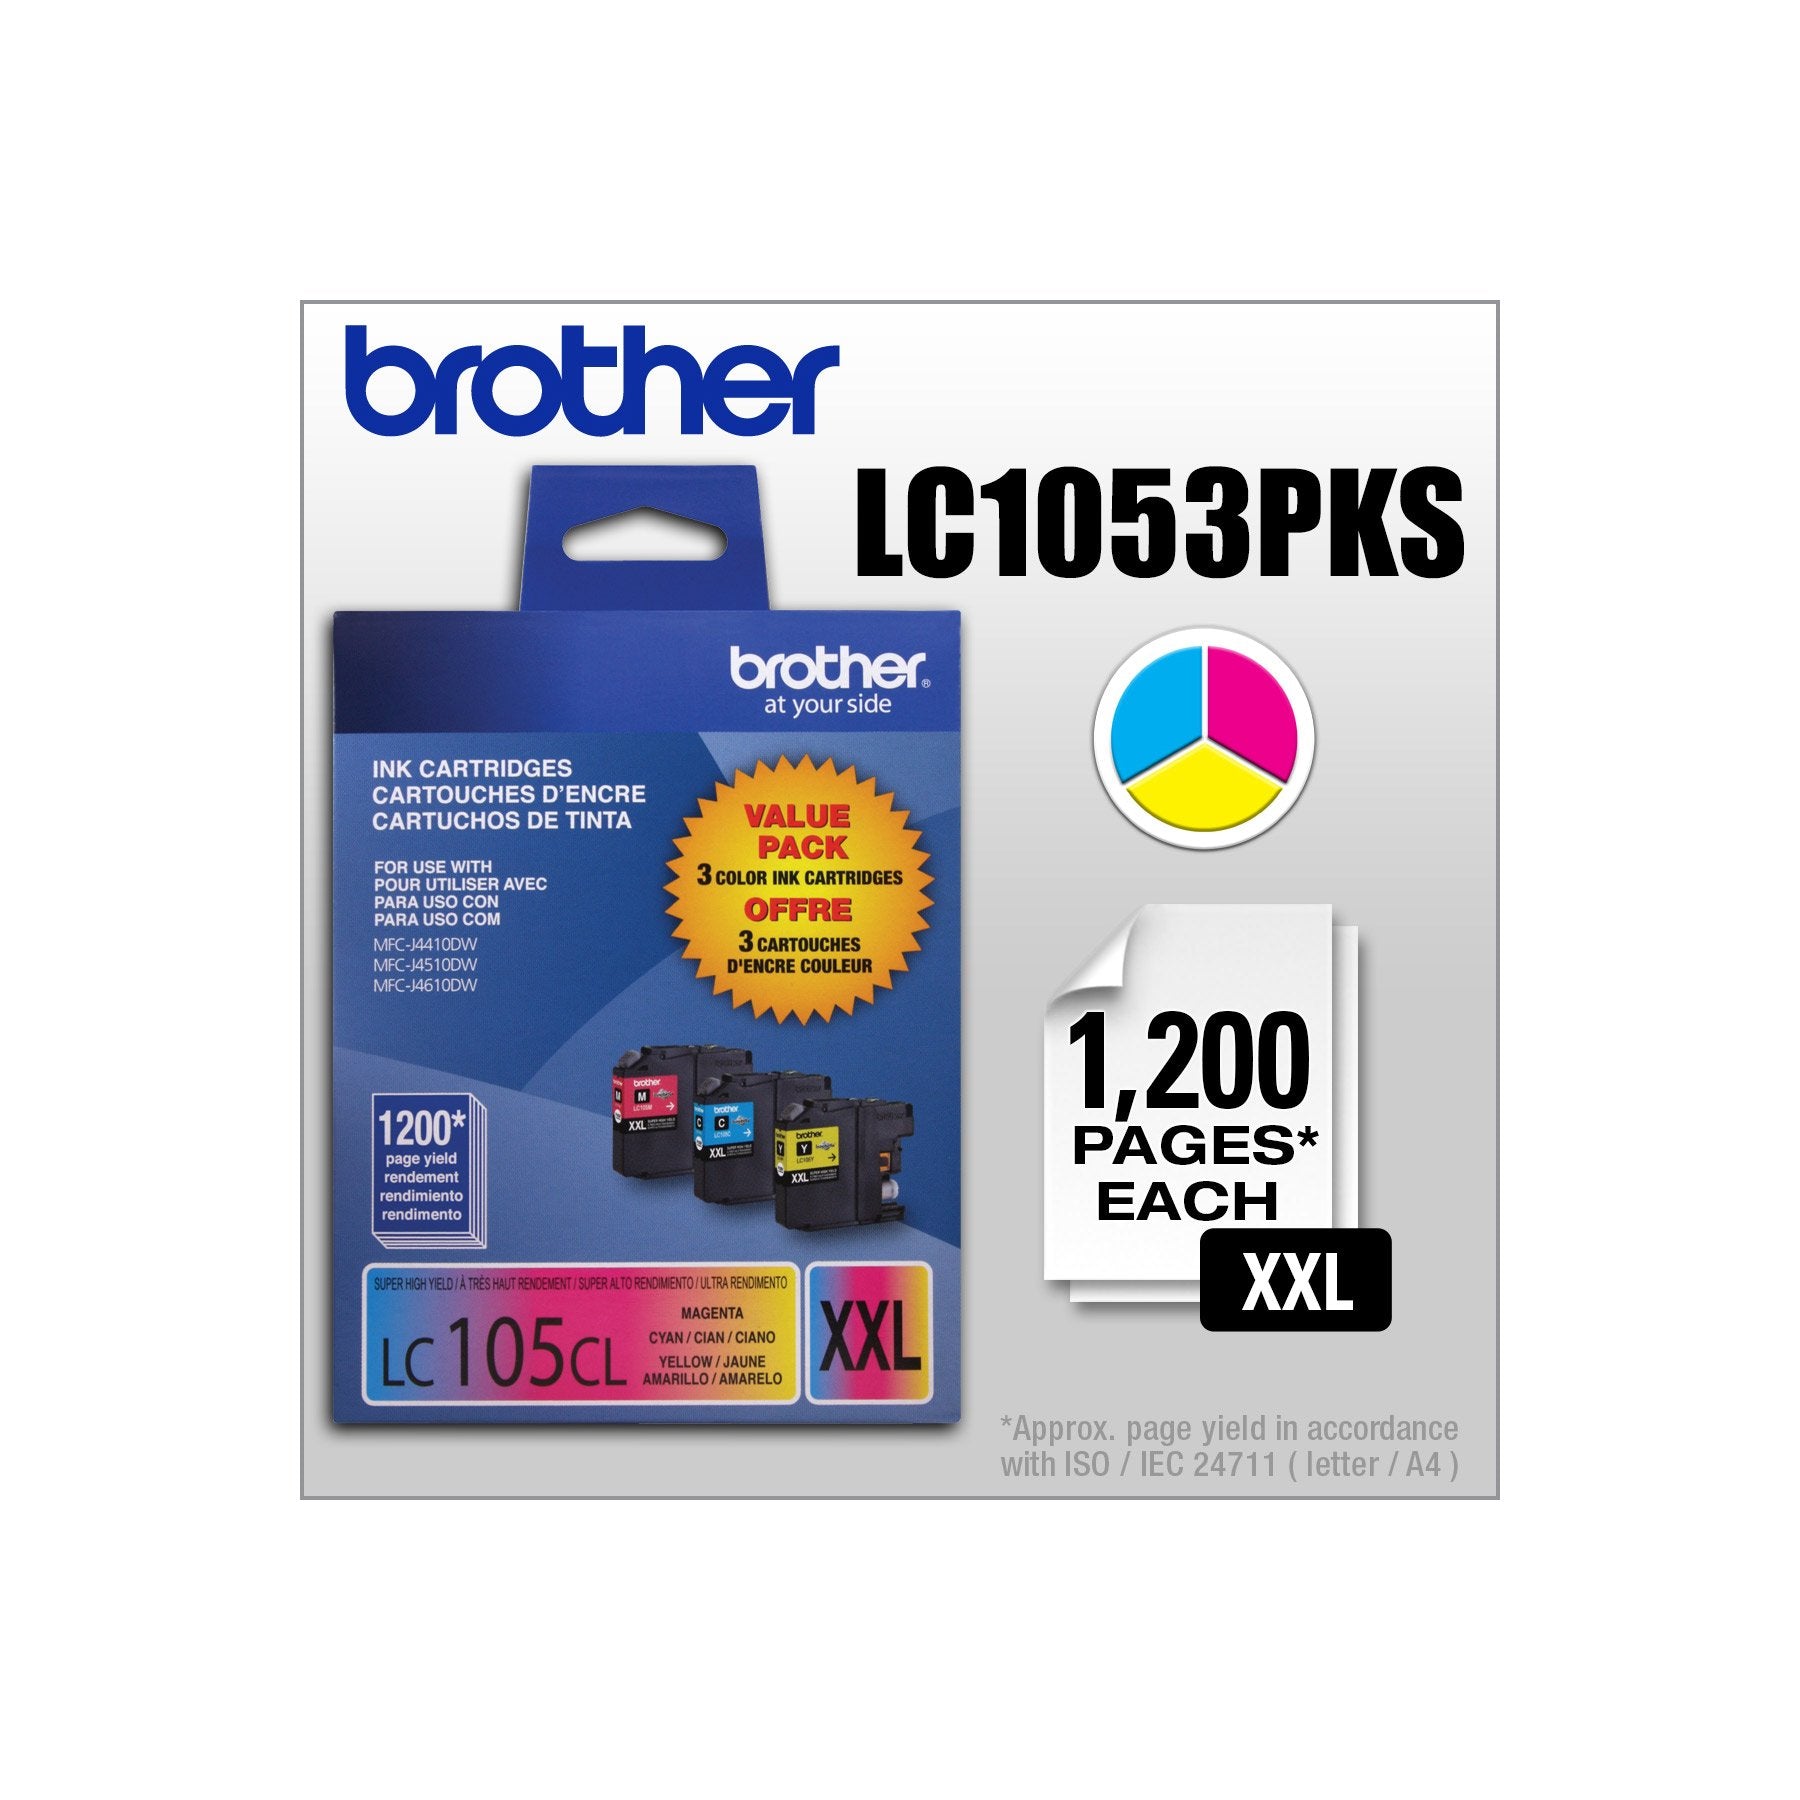 Absolute Toner Genuine Brother LC1053PKS Super High Yield Ink Cartridges Cyan magenta yellow- 3 in a pack Original Brother Cartridges